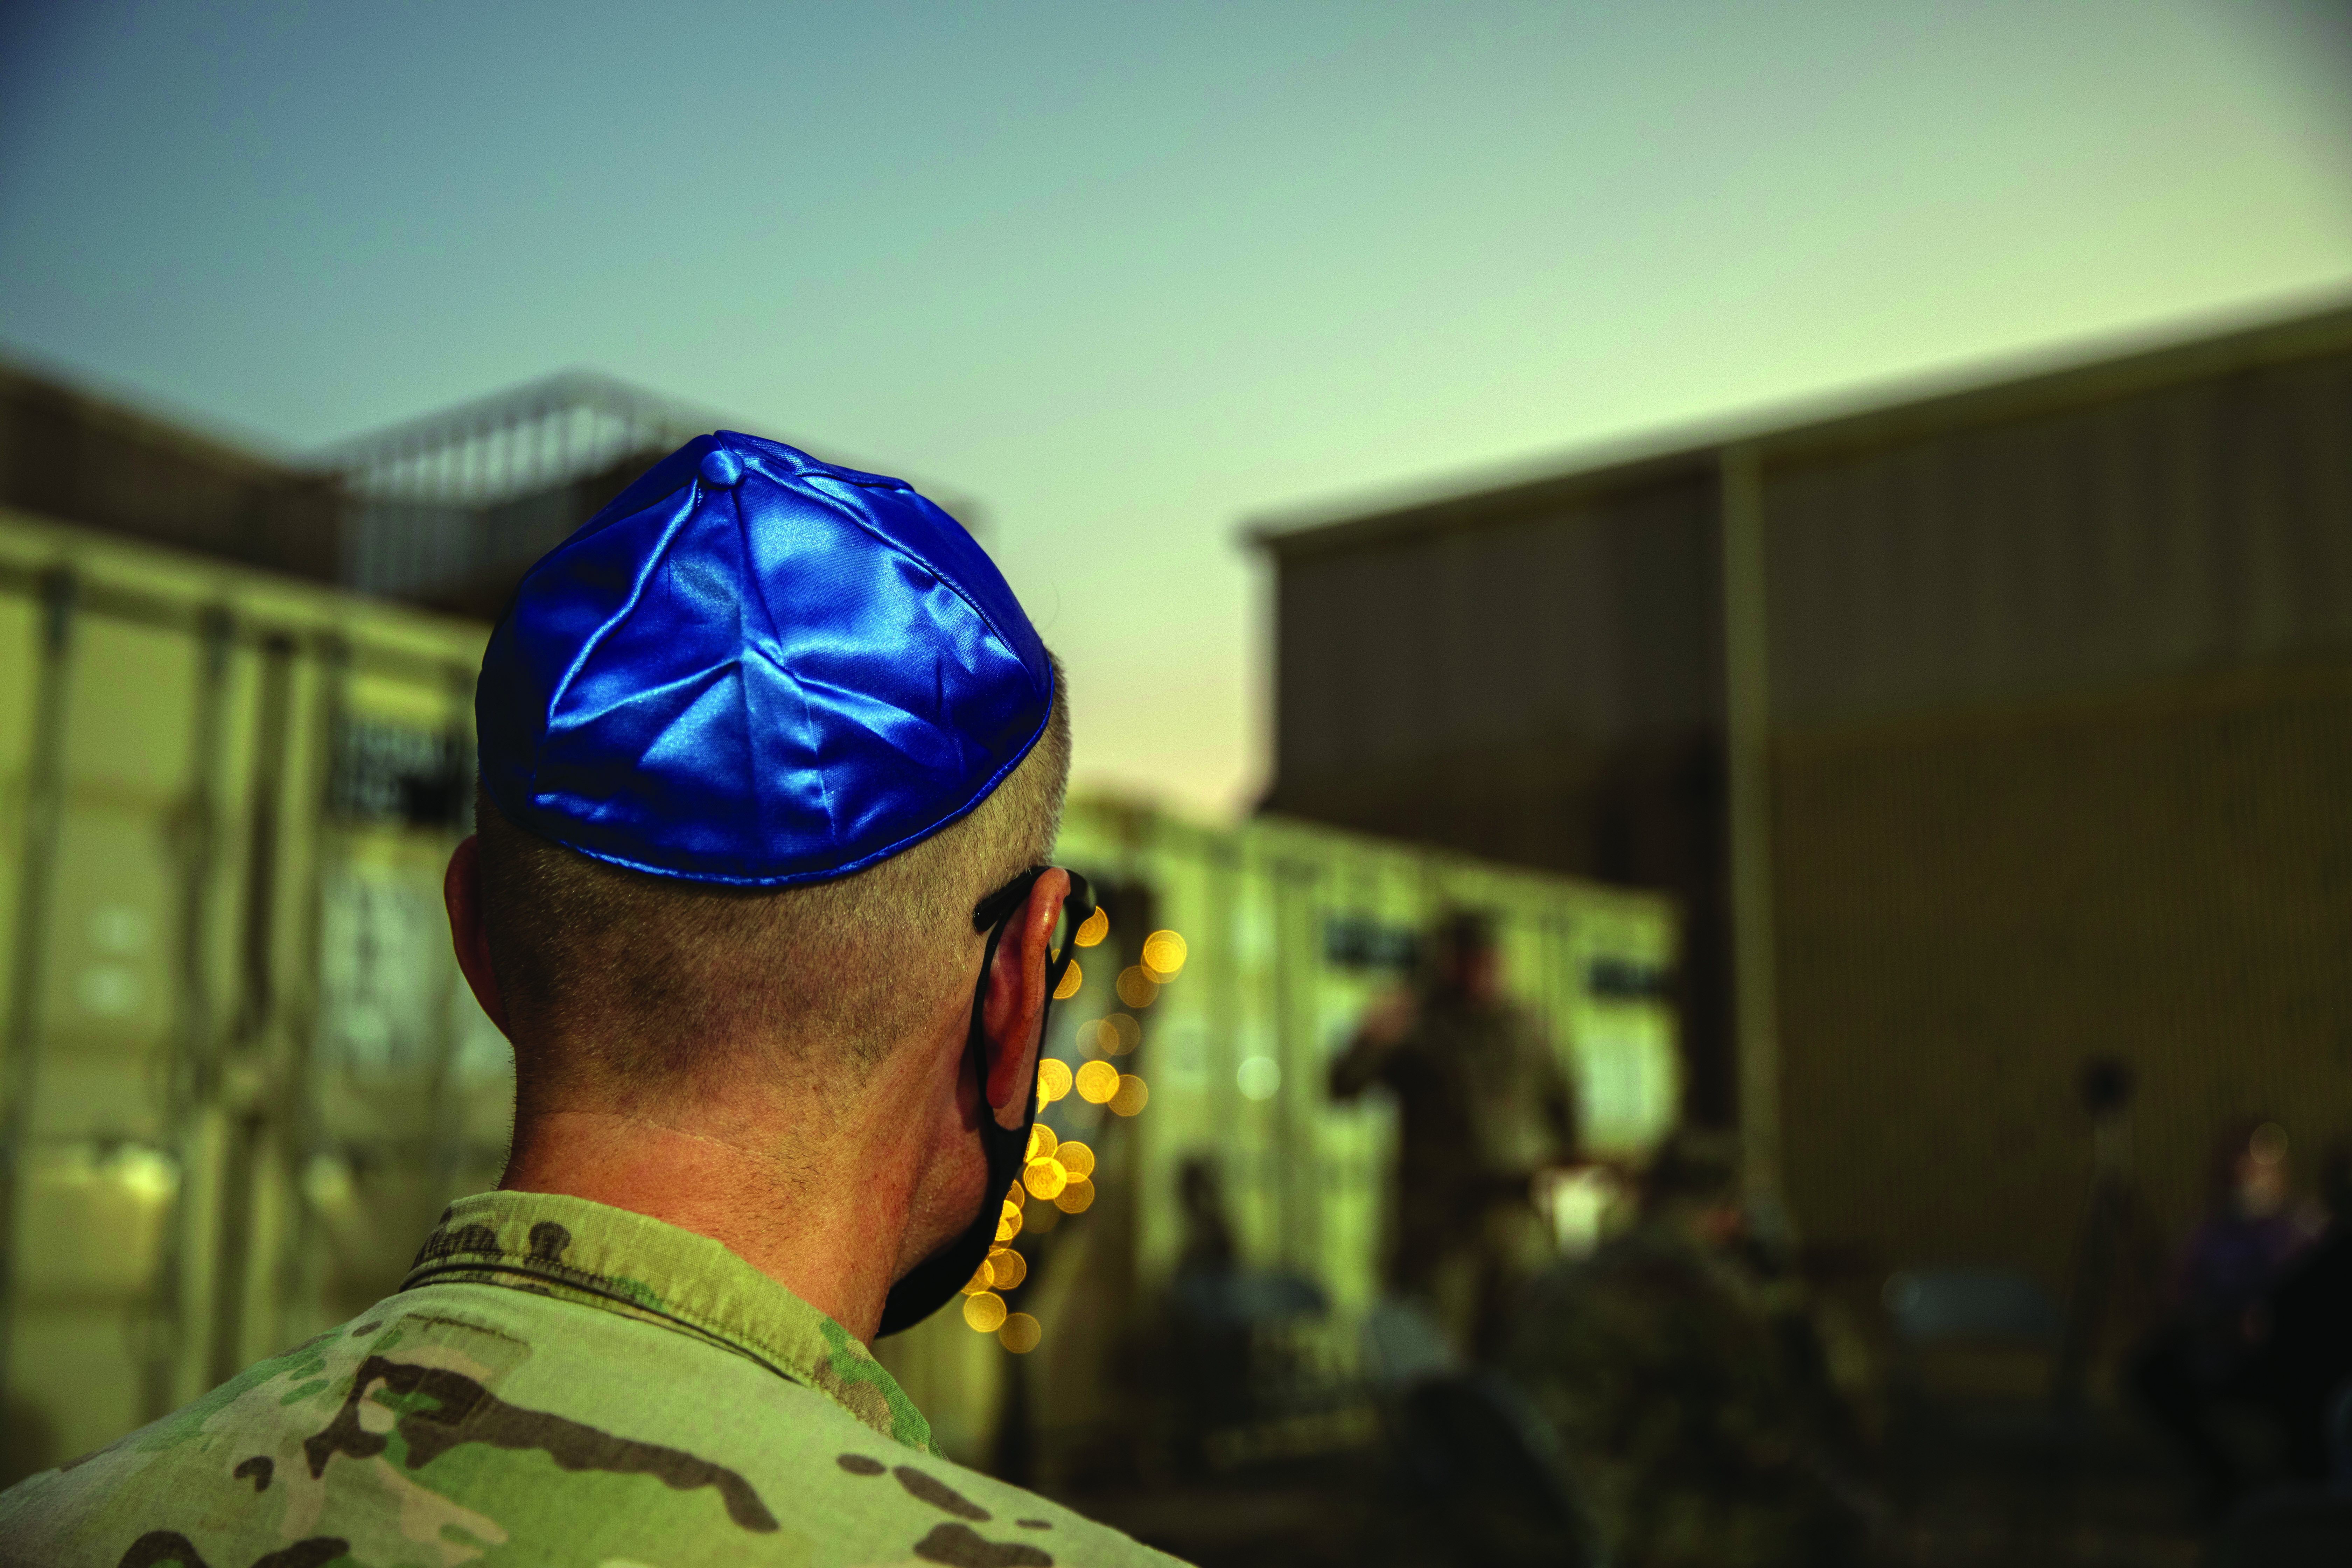 A Service member wears religious headgear during a menorah lighting ceremony in December 2020 on Camp Arifjan, Kuwait. The ceremony was made available
        for all Service members in recognition of the Jewish holiday Hanukkah. (Credit: SGT Khylee Woodford)